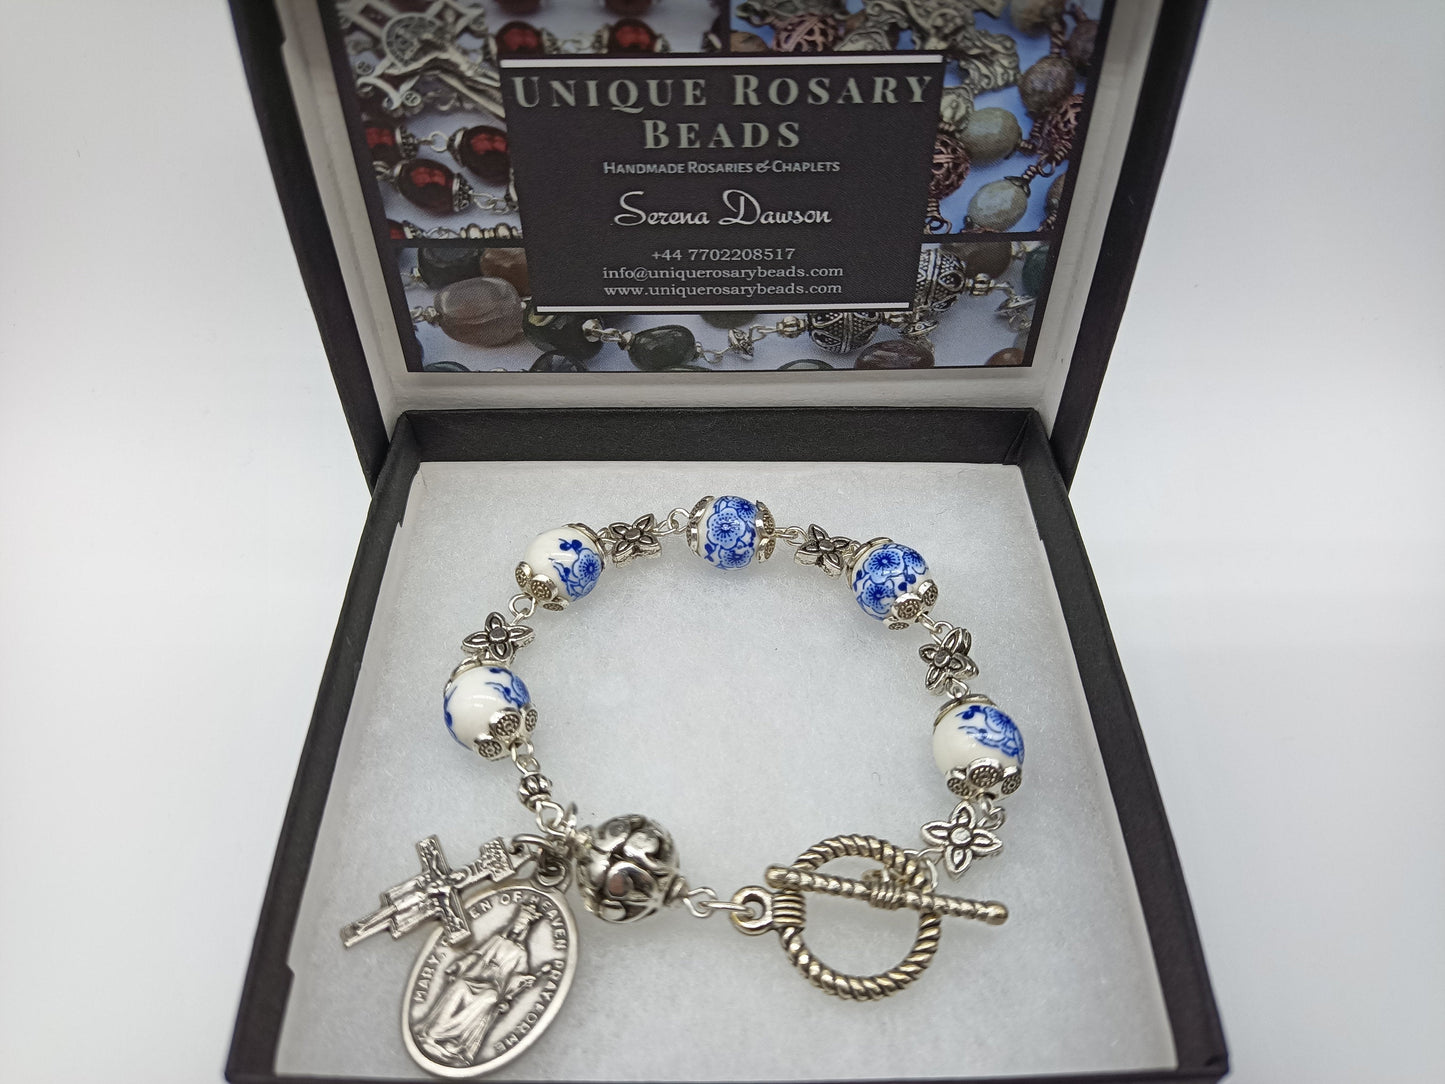 Porcelain single decade rosary bracelet, Our Lady Queen of Heaven Bracelet, St. Frances Crucifix, Jewellery gift, Religious medals.